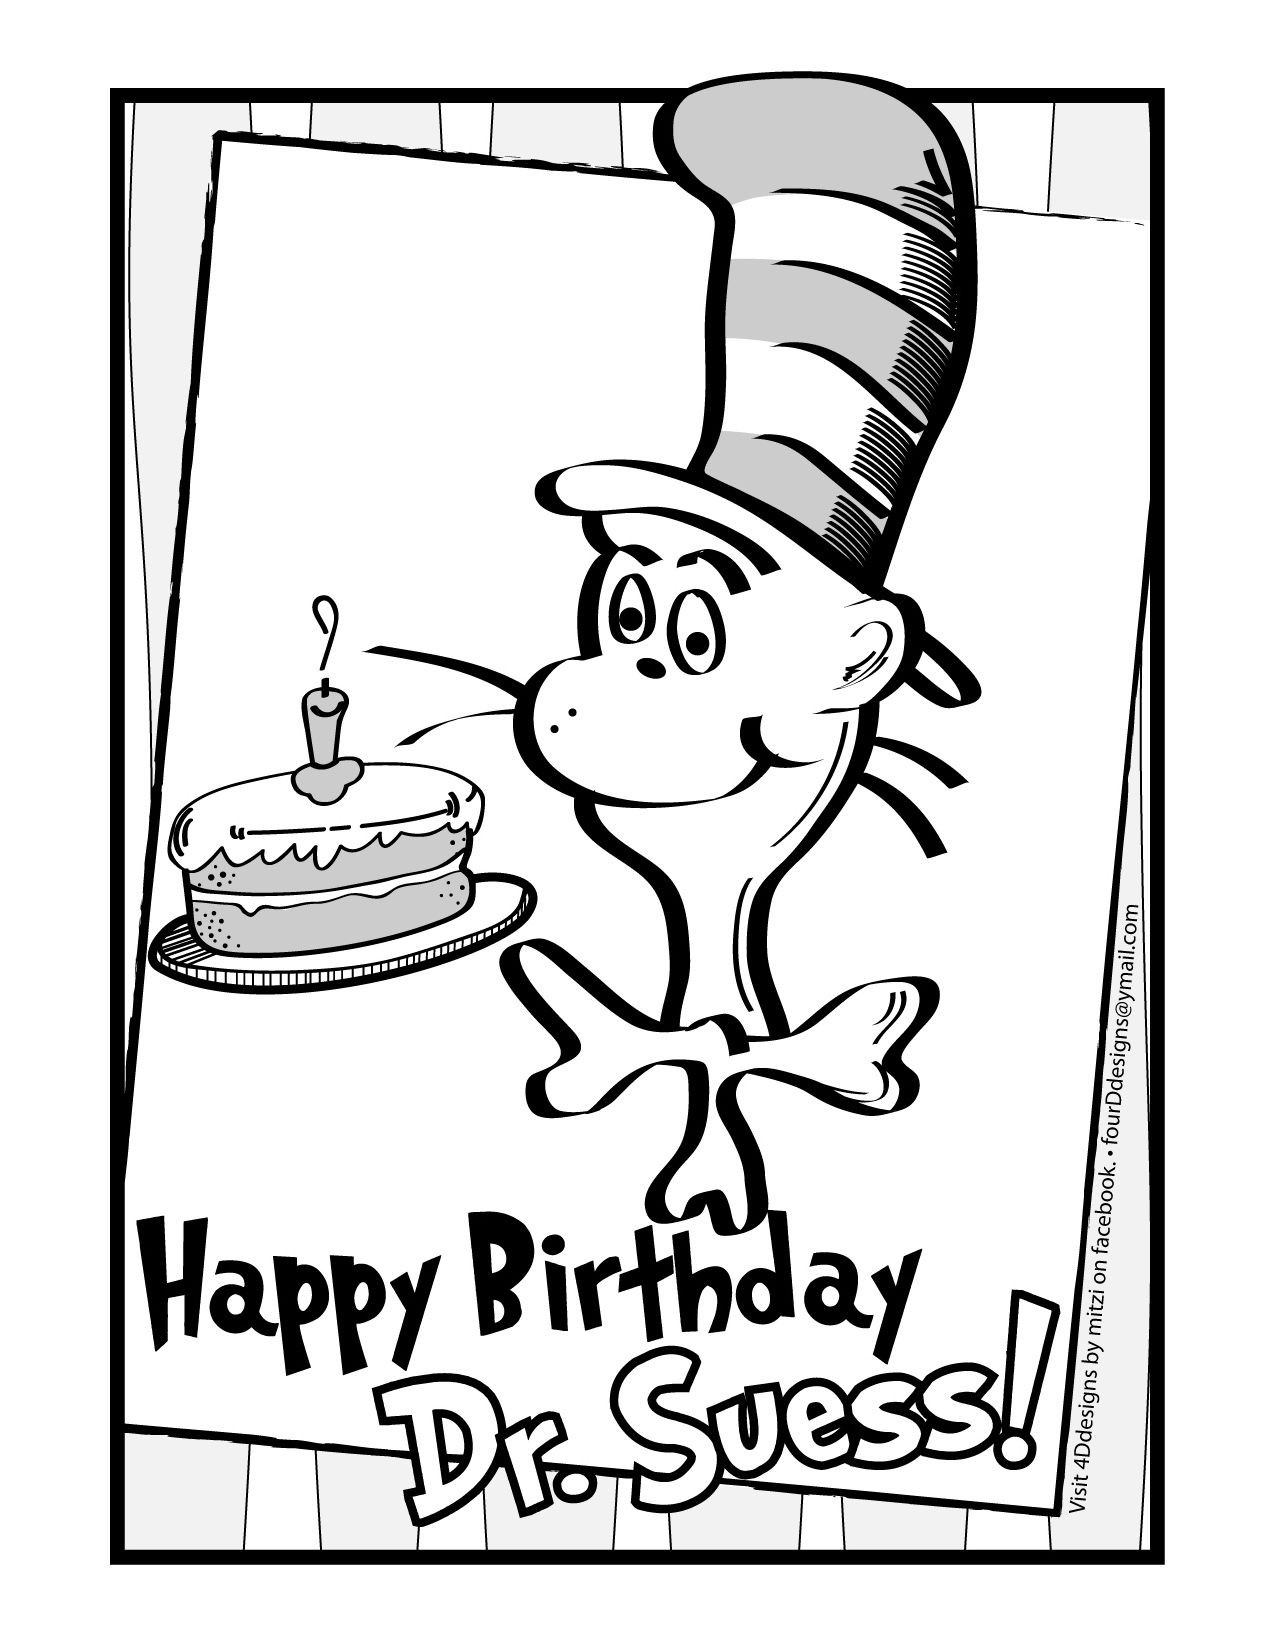 Dr.Seuss Printable Coloring Pages
 Happy Birthday Dr Suess Coloring Page • FREE